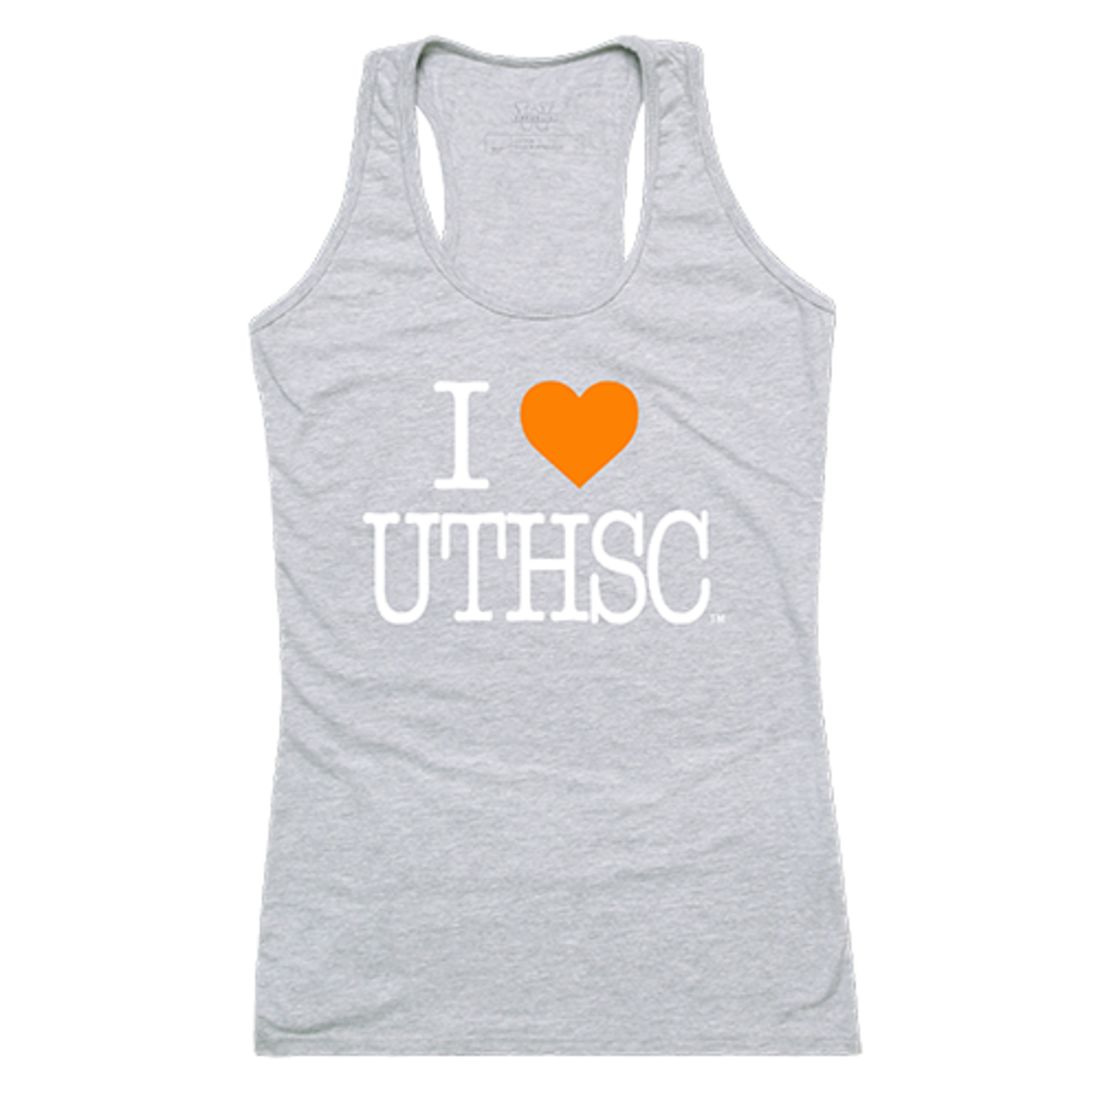 UTHSC University of Tennessee Health Science Center Womens Love Tank Top Tee T-Shirt Heather Grey-Campus-Wardrobe